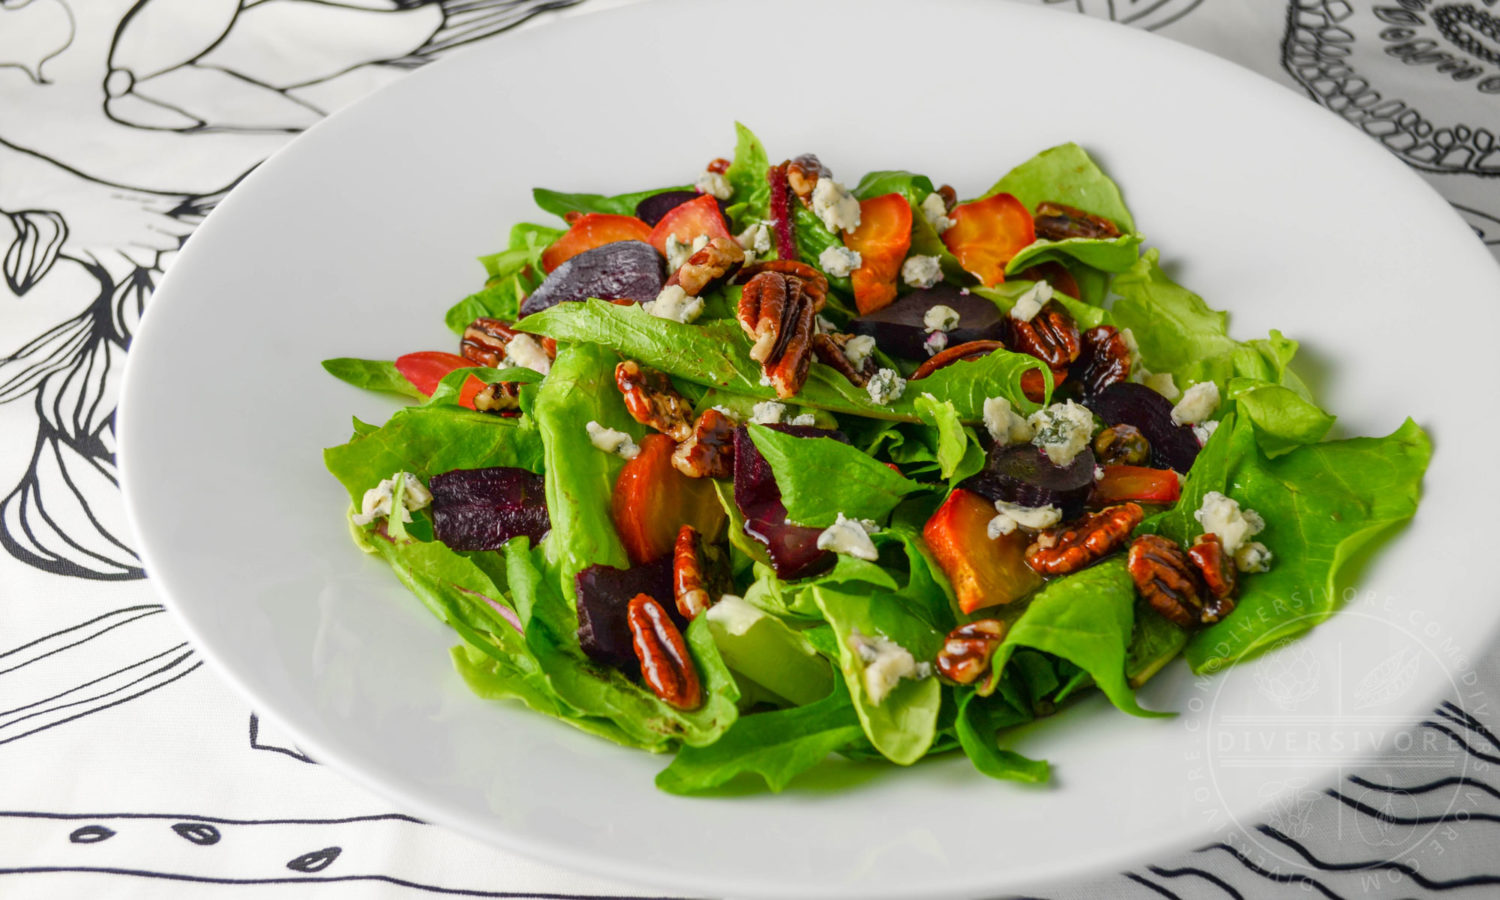 Dandelion and butterleaf lettuce salad with roasted beets, blue cheese, and maple-candied pecans - Diversivore.com